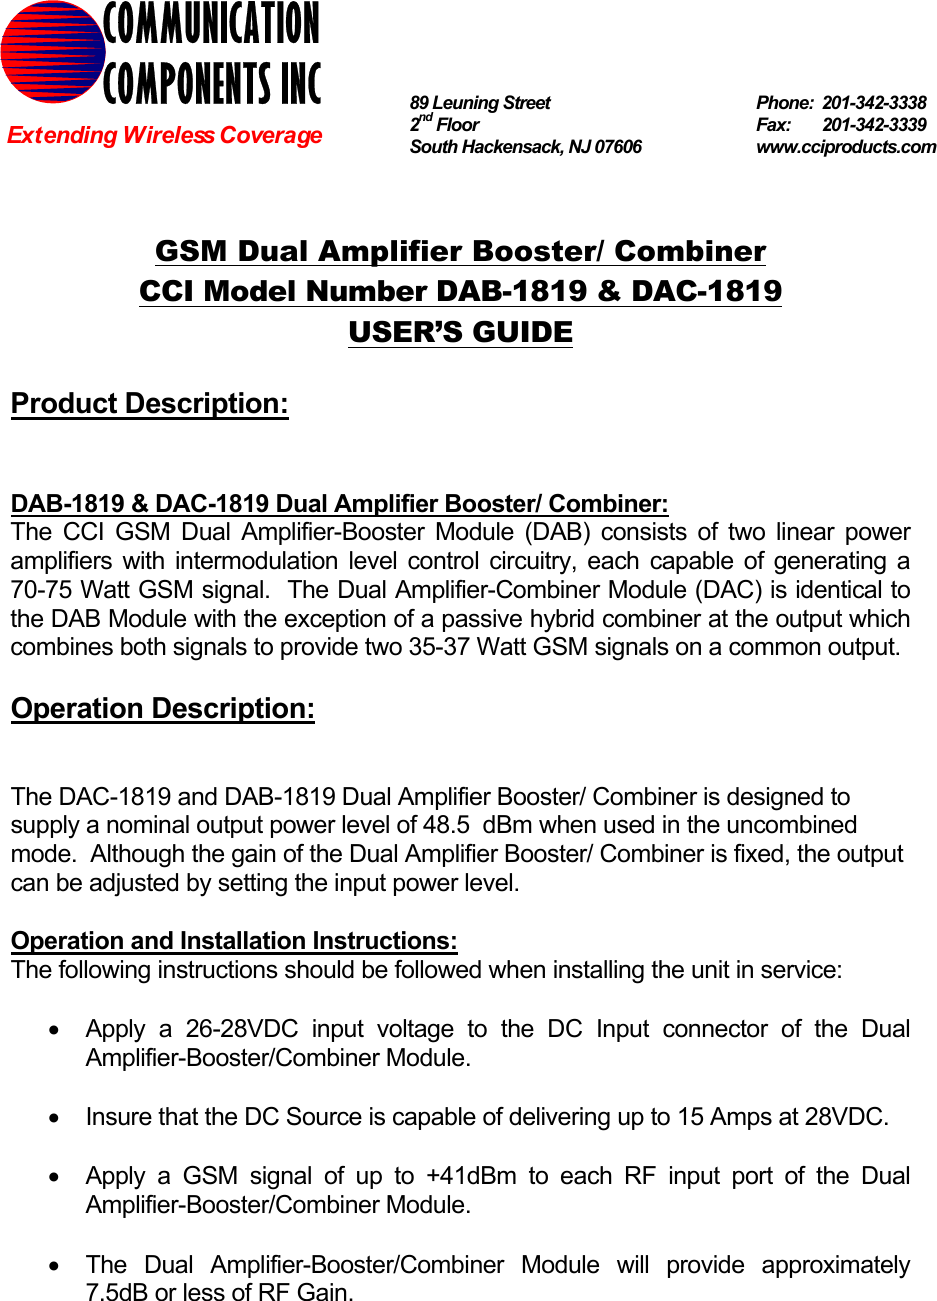   GSM Dual Amplifier Booster/ Combiner CCI Model Number DAB-1819 &amp; DAC-1819 USER’S GUIDE  Product Description:   DAB-1819 &amp; DAC-1819 Dual Amplifier Booster/ Combiner: The CCI GSM Dual Amplifier-Booster Module (DAB) consists of two linear power amplifiers with intermodulation level control circuitry, each capable of generating a 70-75 Watt GSM signal.  The Dual Amplifier-Combiner Module (DAC) is identical to the DAB Module with the exception of a passive hybrid combiner at the output which combines both signals to provide two 35-37 Watt GSM signals on a common output.  Operation Description:   The DAC-1819 and DAB-1819 Dual Amplifier Booster/ Combiner is designed to supply a nominal output power level of 48.5  dBm when used in the uncombined mode.  Although the gain of the Dual Amplifier Booster/ Combiner is fixed, the output can be adjusted by setting the input power level.    Operation and Installation Instructions: The following instructions should be followed when installing the unit in service:  •  Apply a 26-28VDC input voltage to the DC Input connector of the Dual Amplifier-Booster/Combiner Module.  •  Insure that the DC Source is capable of delivering up to 15 Amps at 28VDC.  •  Apply a GSM signal of up to +41dBm to each RF input port of the Dual Amplifier-Booster/Combiner Module.  •  The Dual Amplifier-Booster/Combiner Module will provide approximately 7.5dB or less of RF Gain.  COMMUNICATION COMPONENTS INC Extending Wireless Coverage 89 Leuning Street   Phone: 201-342-3338 2nd Floor  Fax:   201-342-3339 South Hackensack, NJ 07606   www.cciproducts.com 